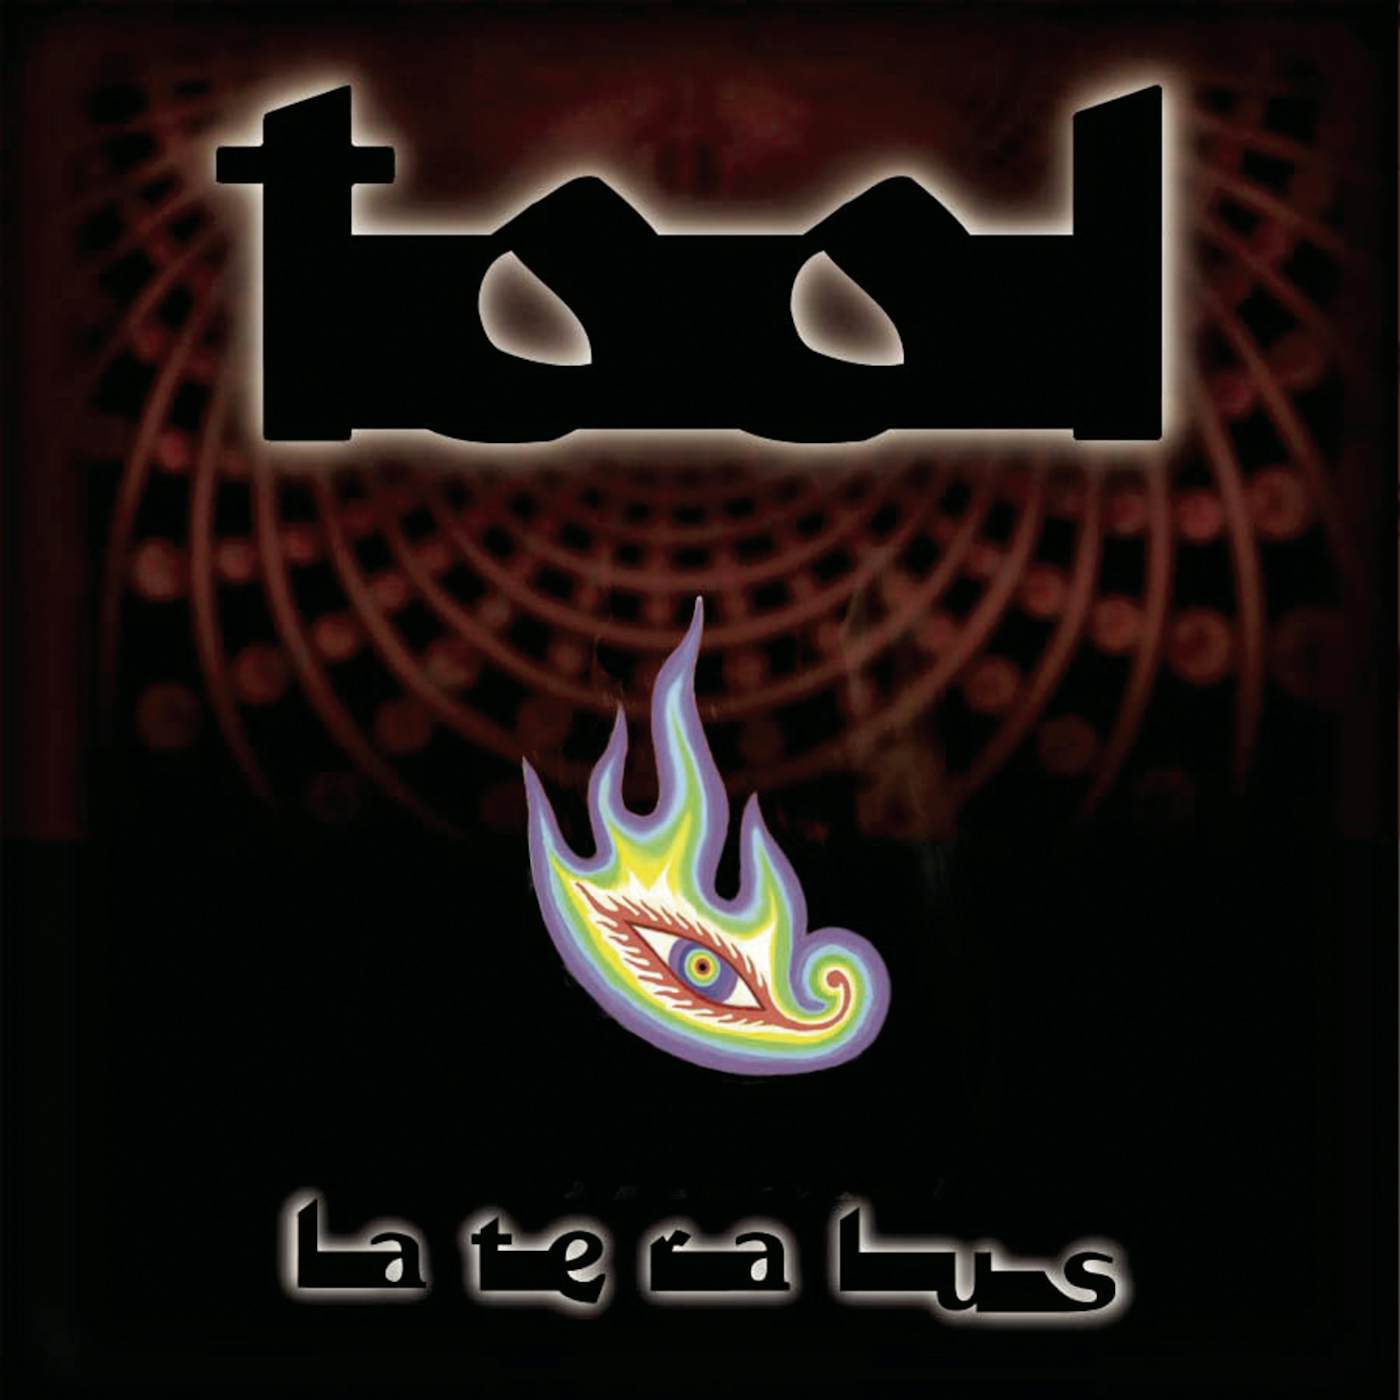 Tool - Lateralus (2001) - New 2 LP Record 2022 Volcano Picture Disc Vinyl -  Prog Rock / Hard Rock